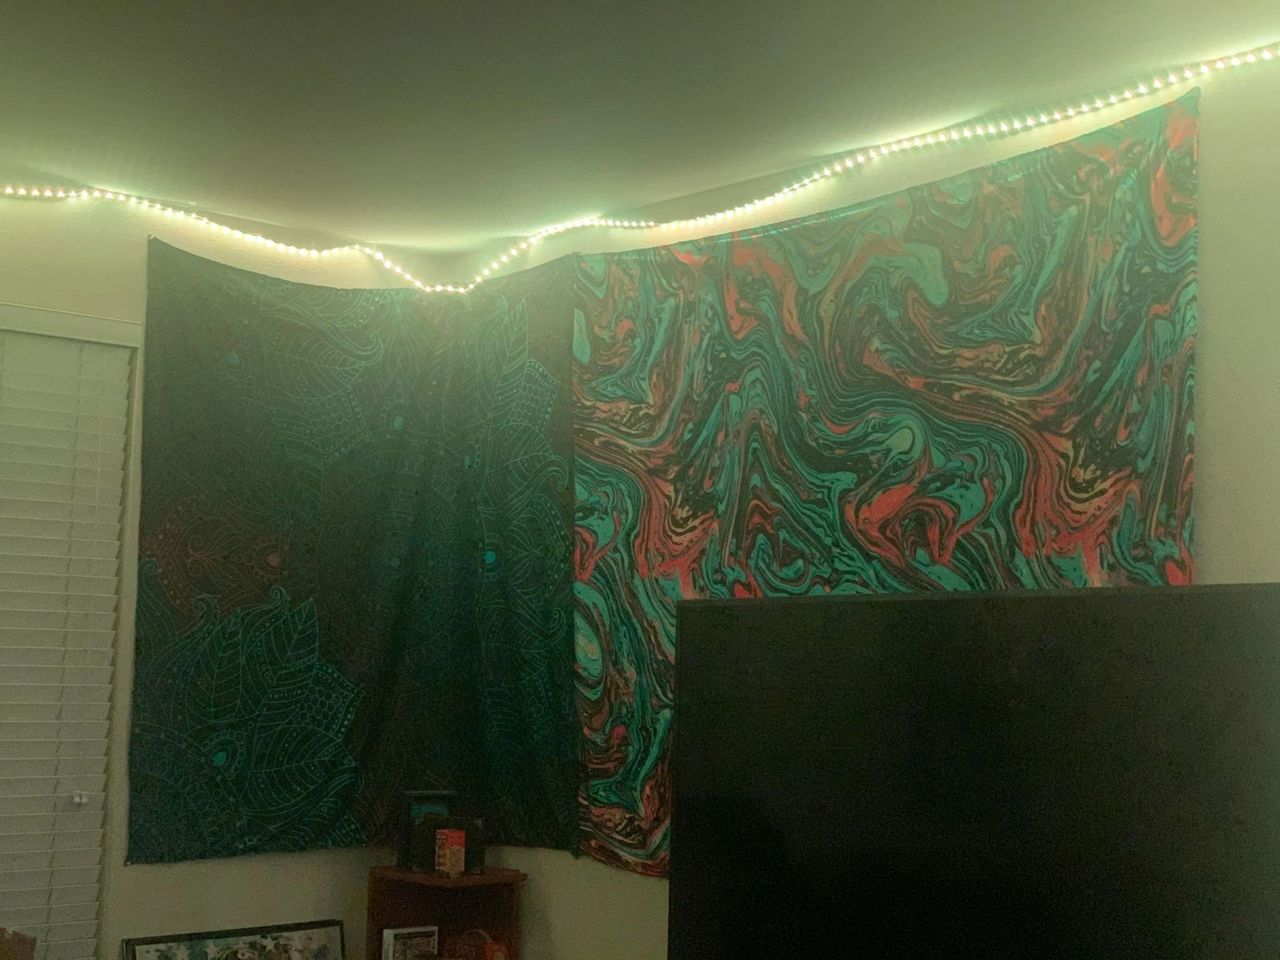 Having colorful lights and cool tapestries as a background can add POP to your stream